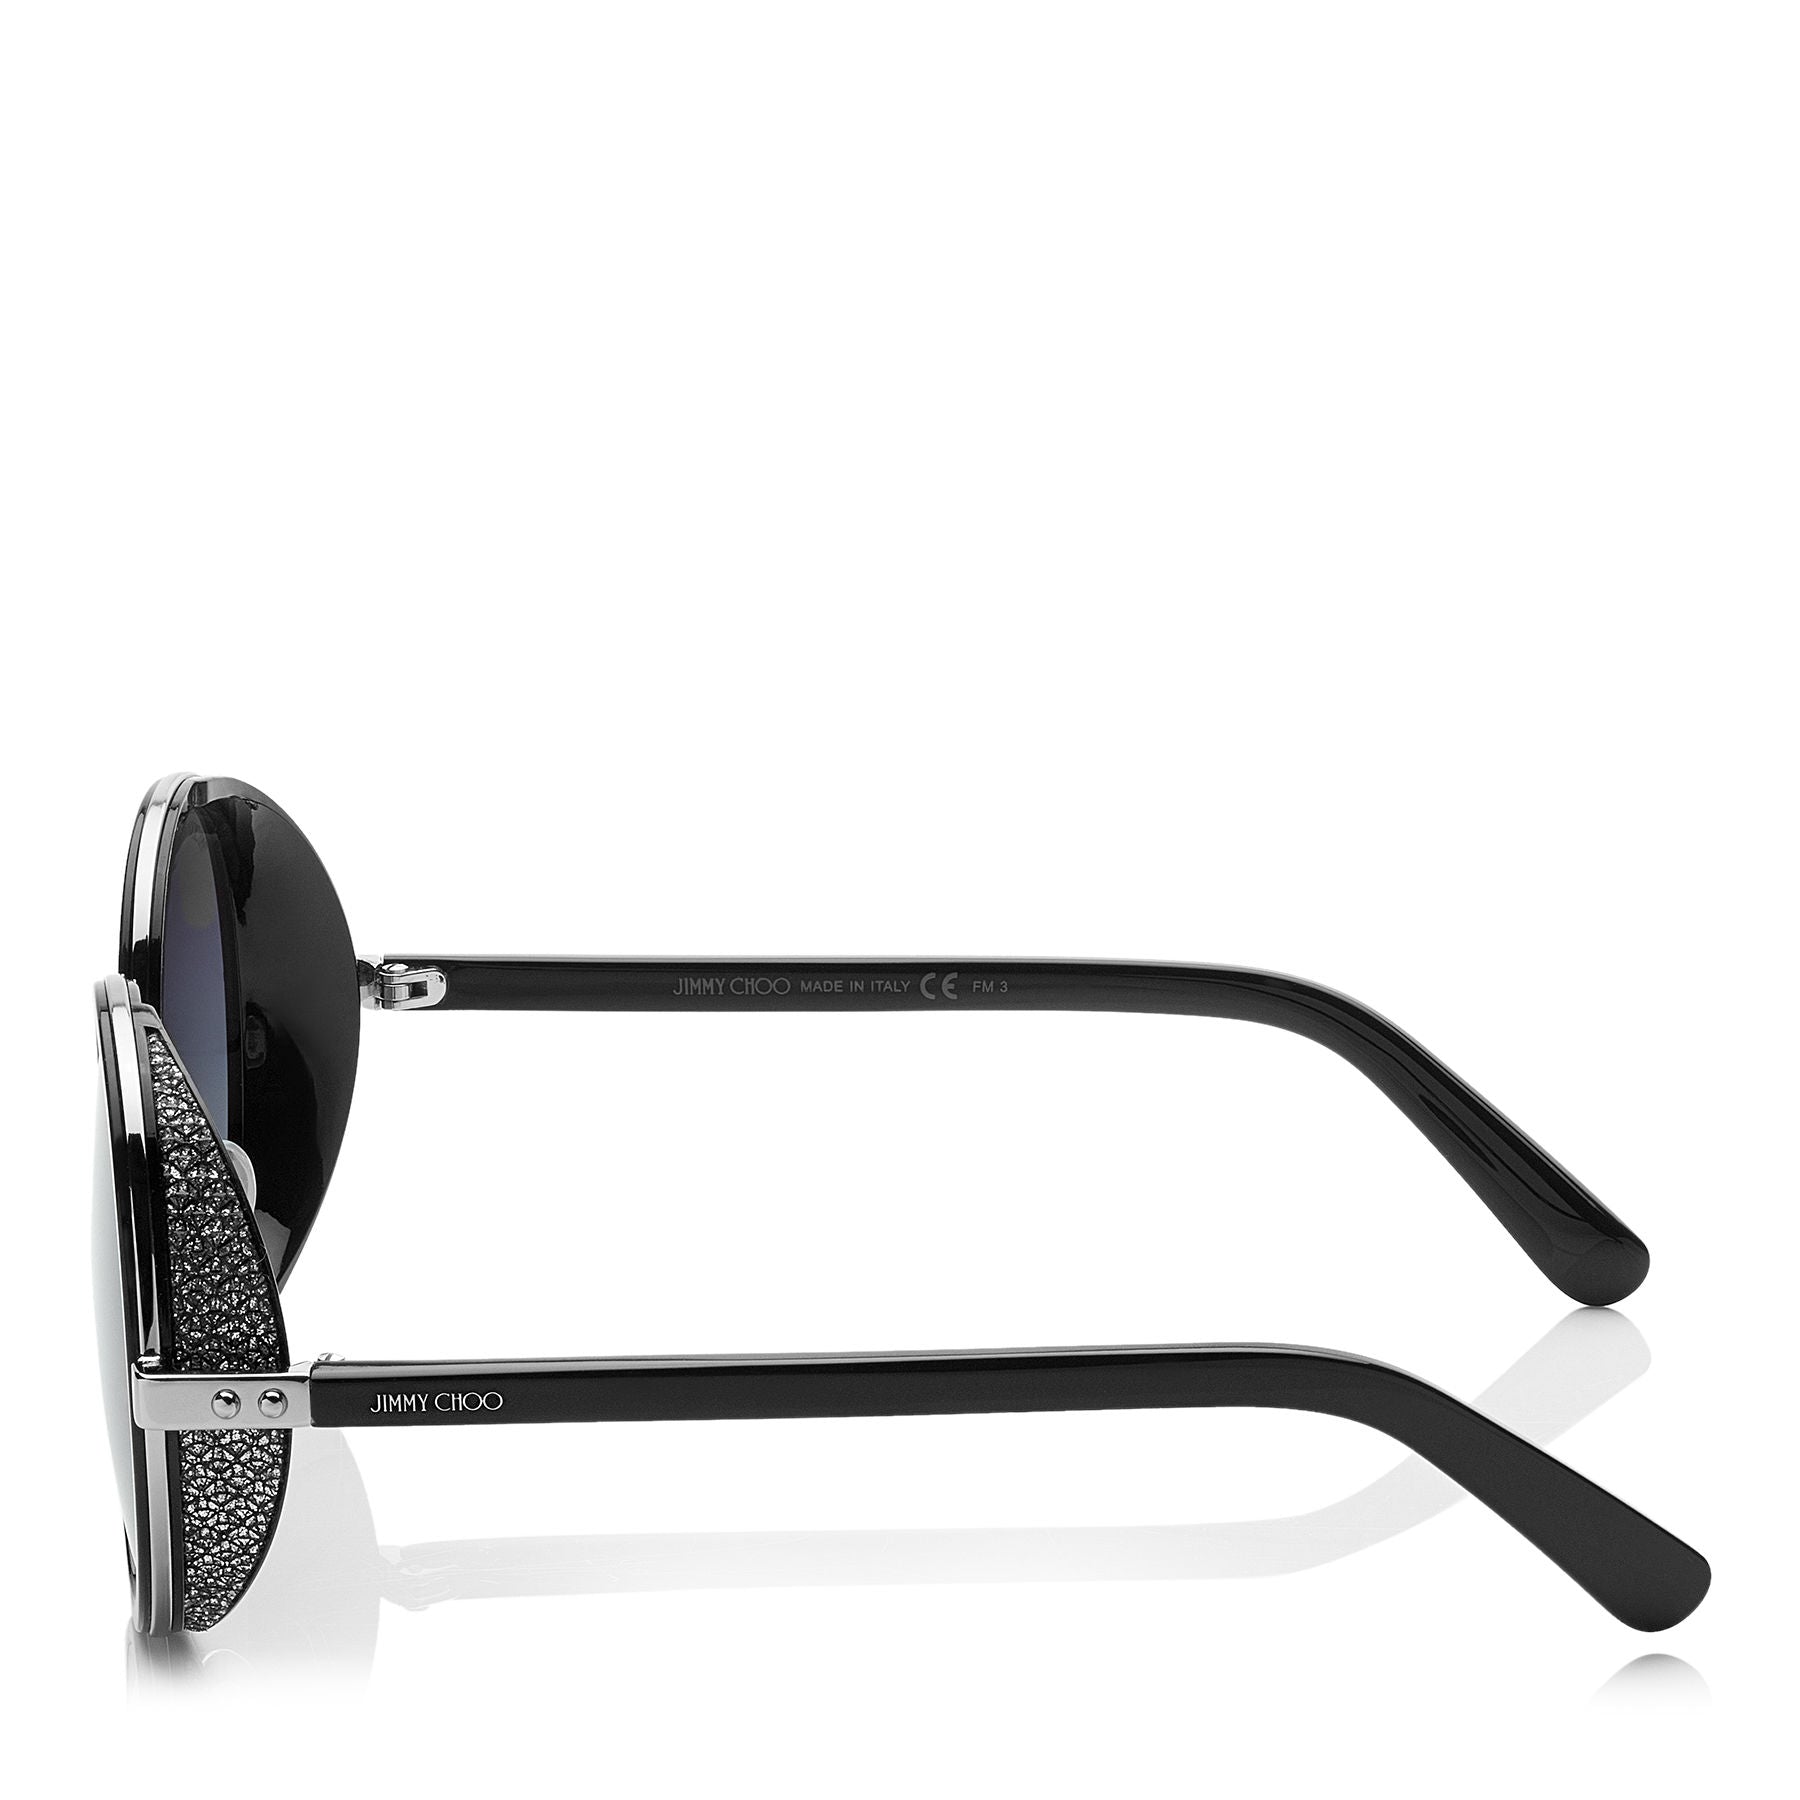 JIMMY CHOO Andie Black Acetate Round Framed Sunglasses with Silver Lurex Detailing ITEM NO. ANDIENS54EB1A